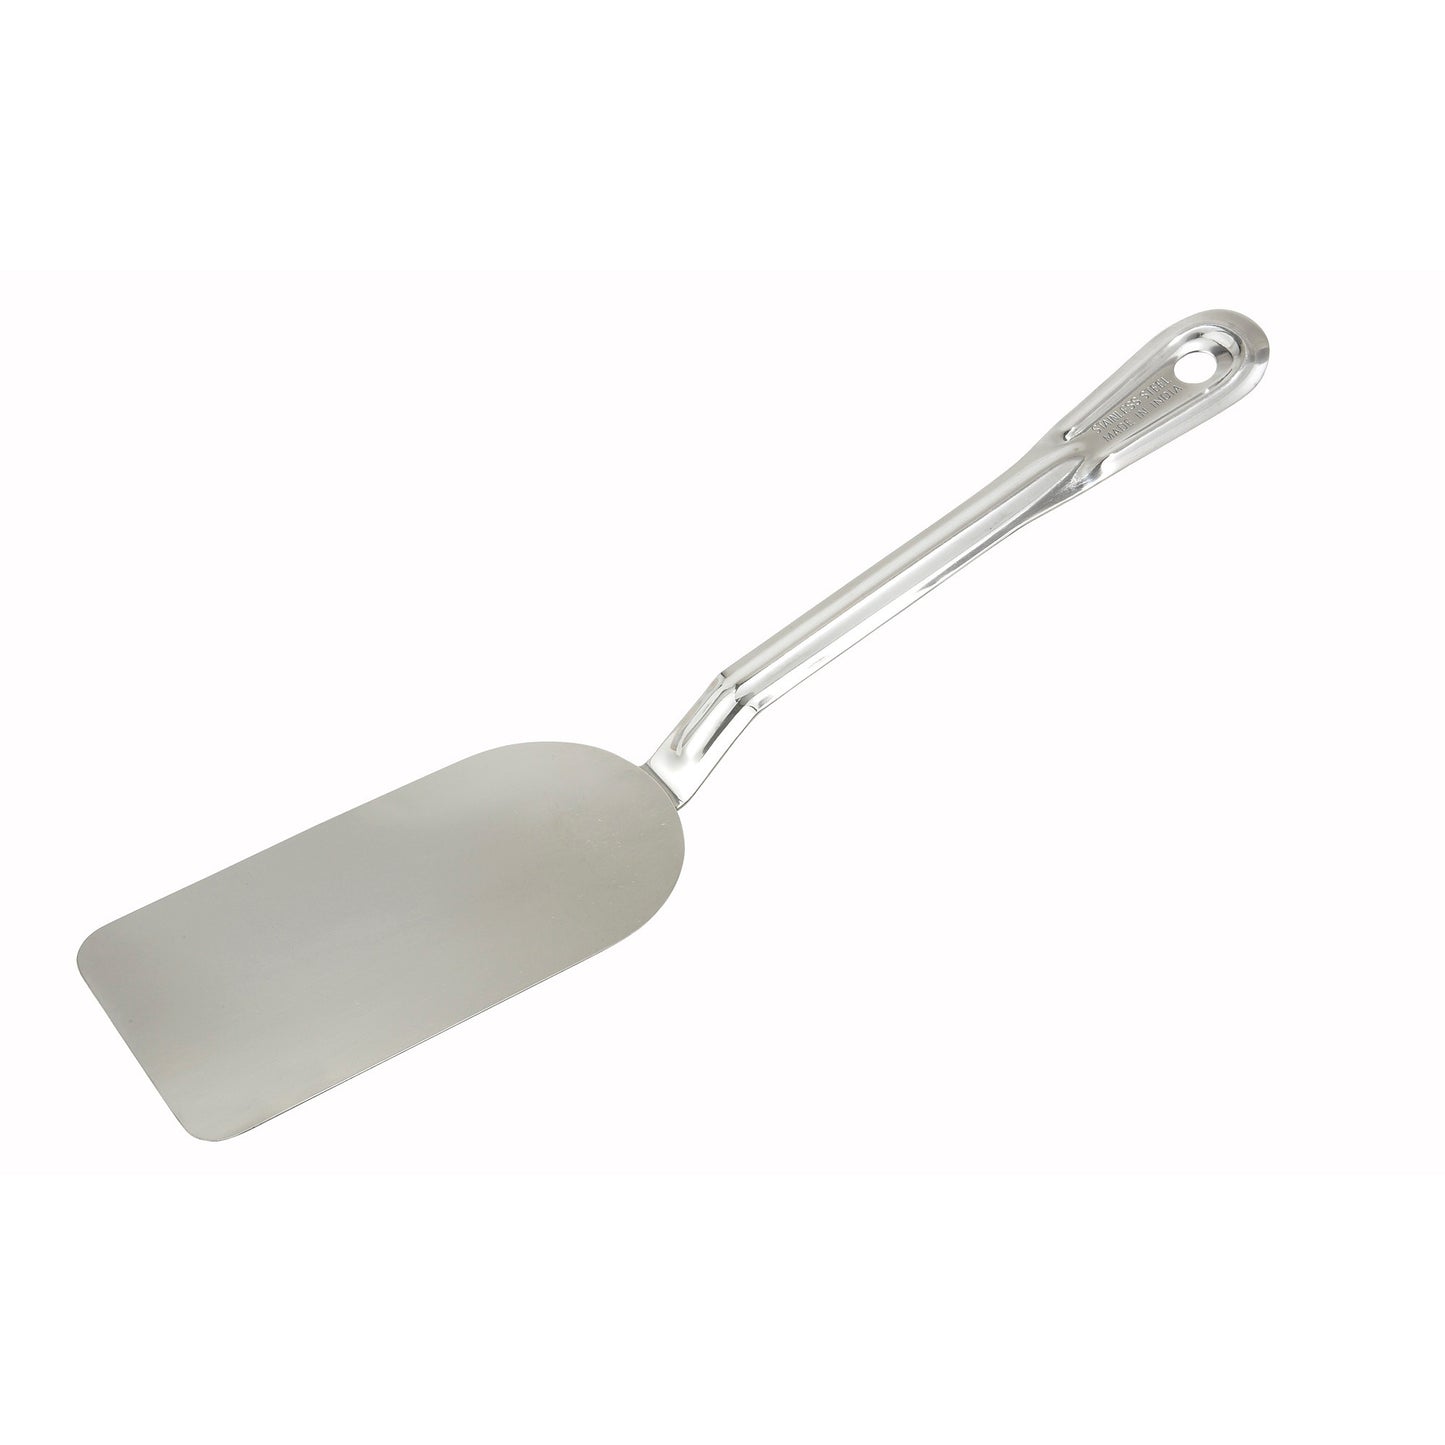 STN-6 - Stainless Steel Serving Turner, 14" - Solid